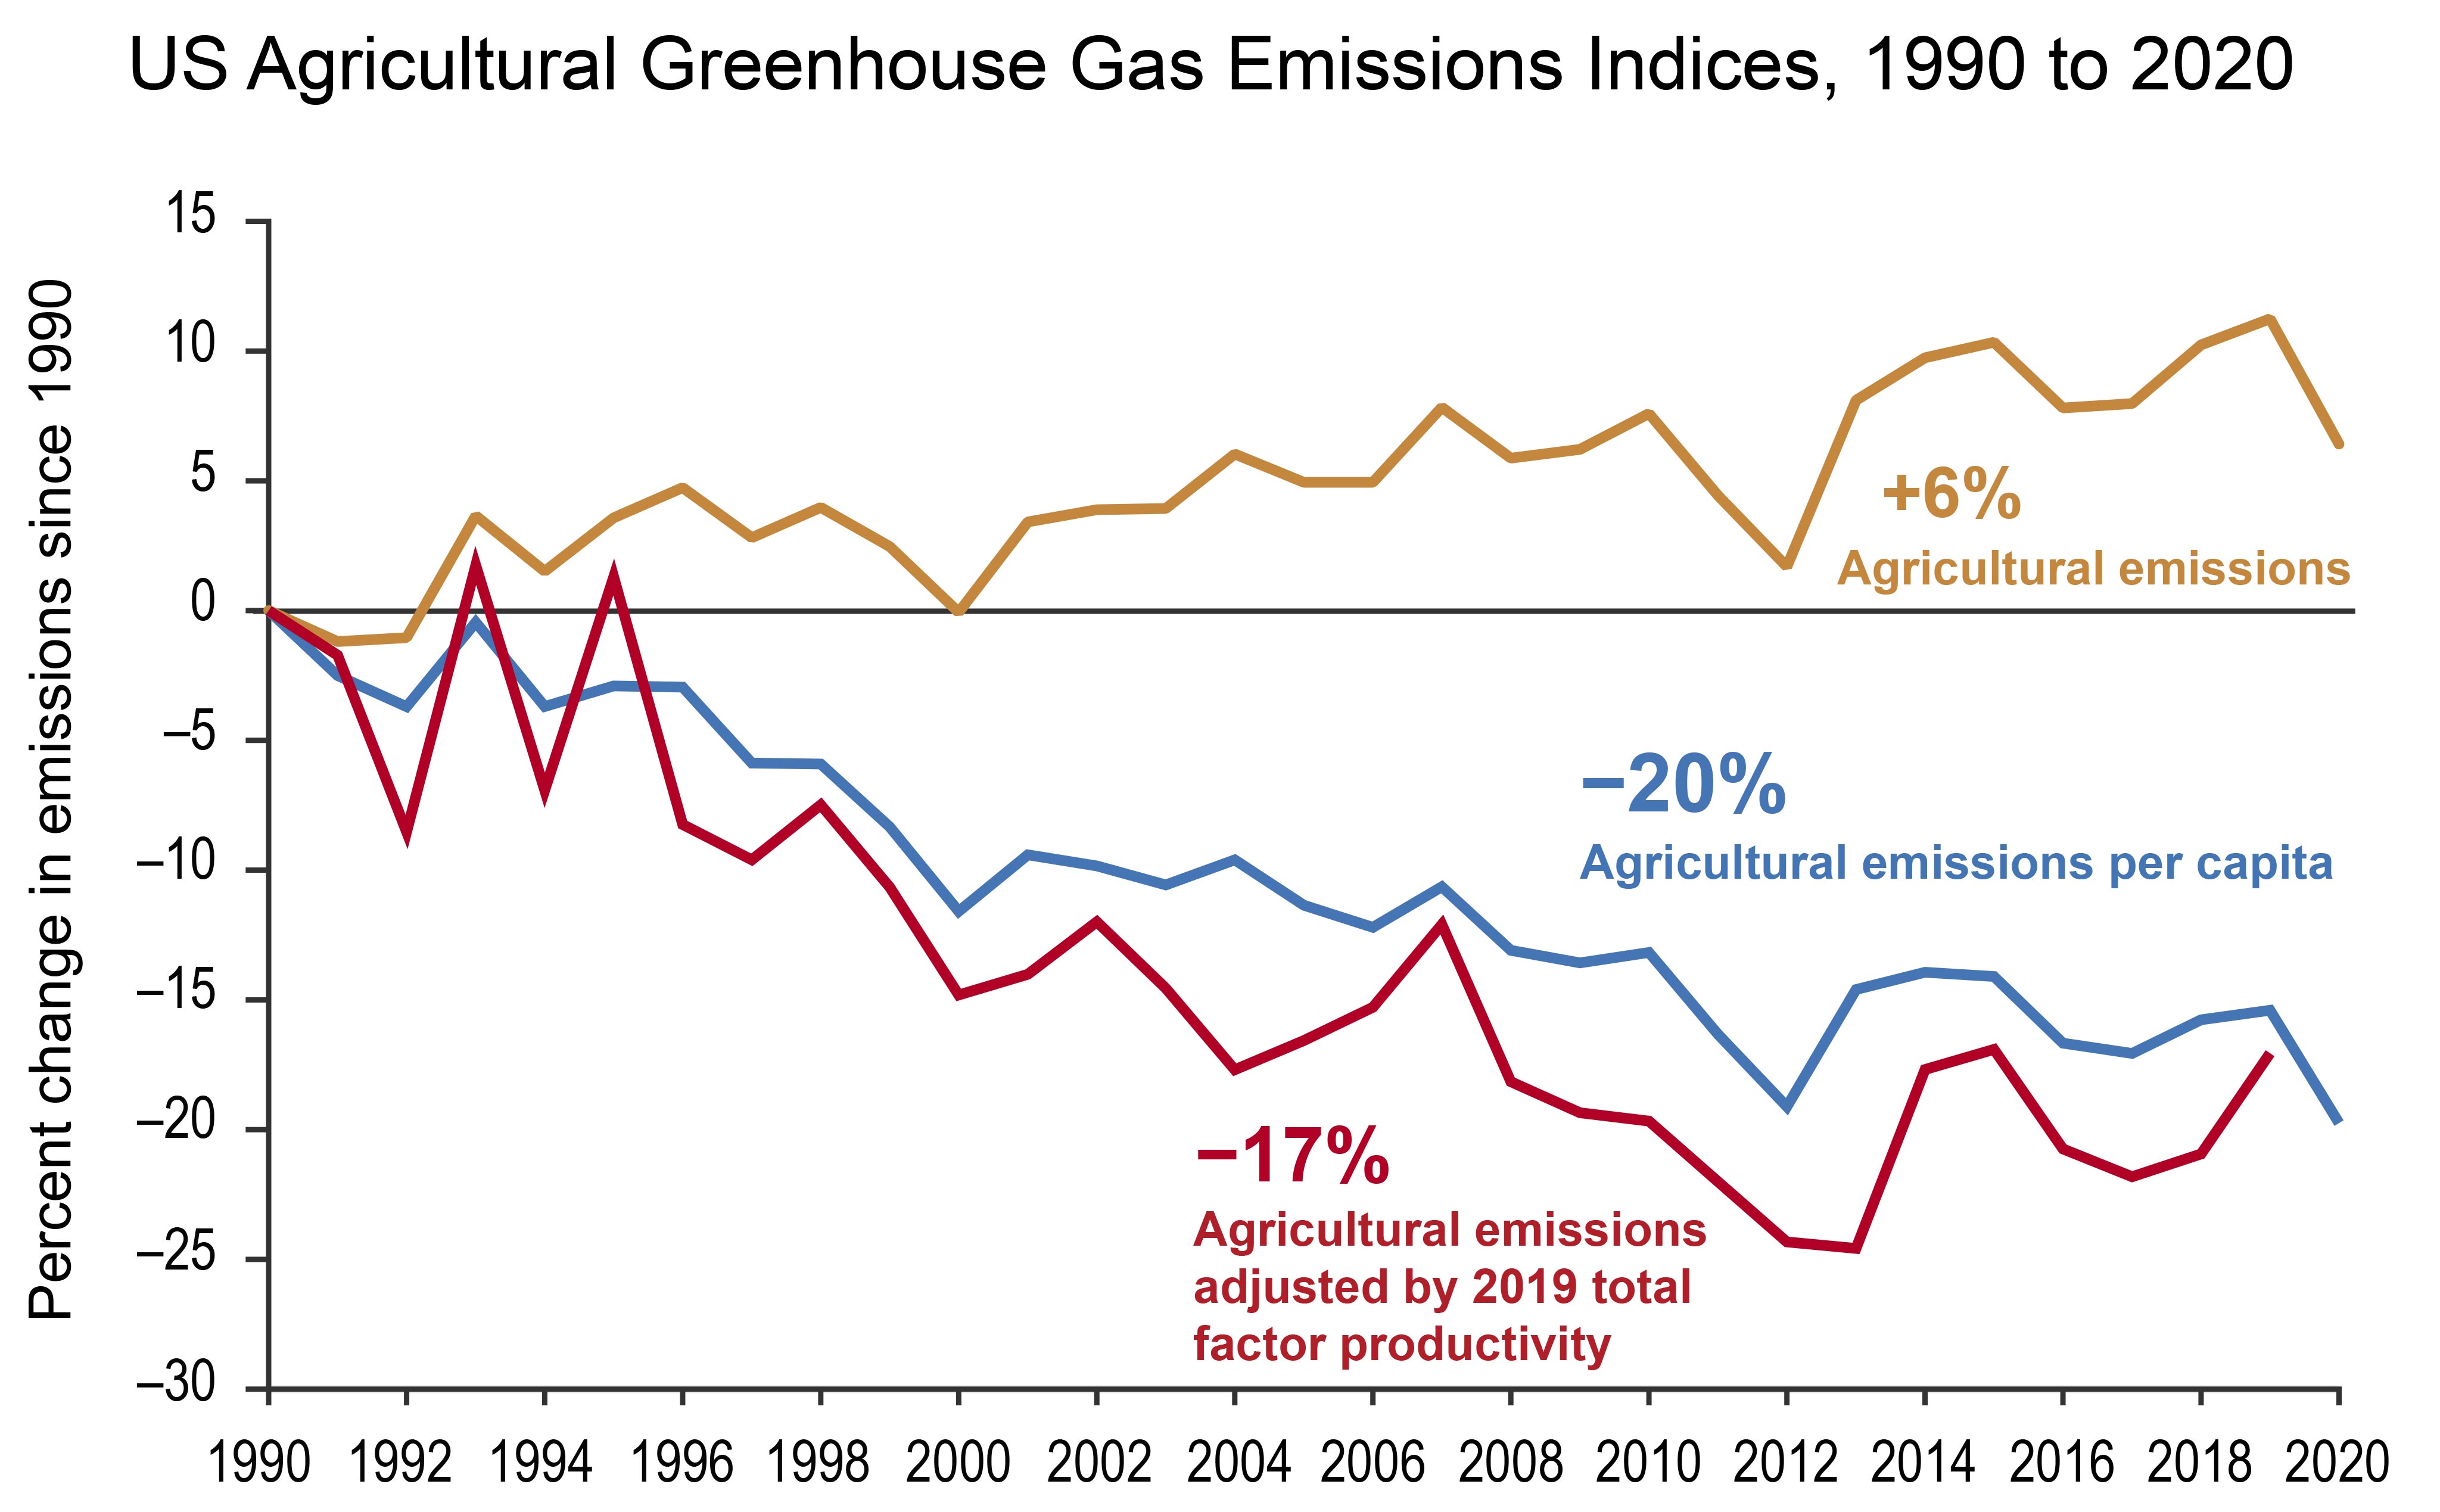 US Agricultural Greenhouse Gas Emissions Indices, 1990 to 2020